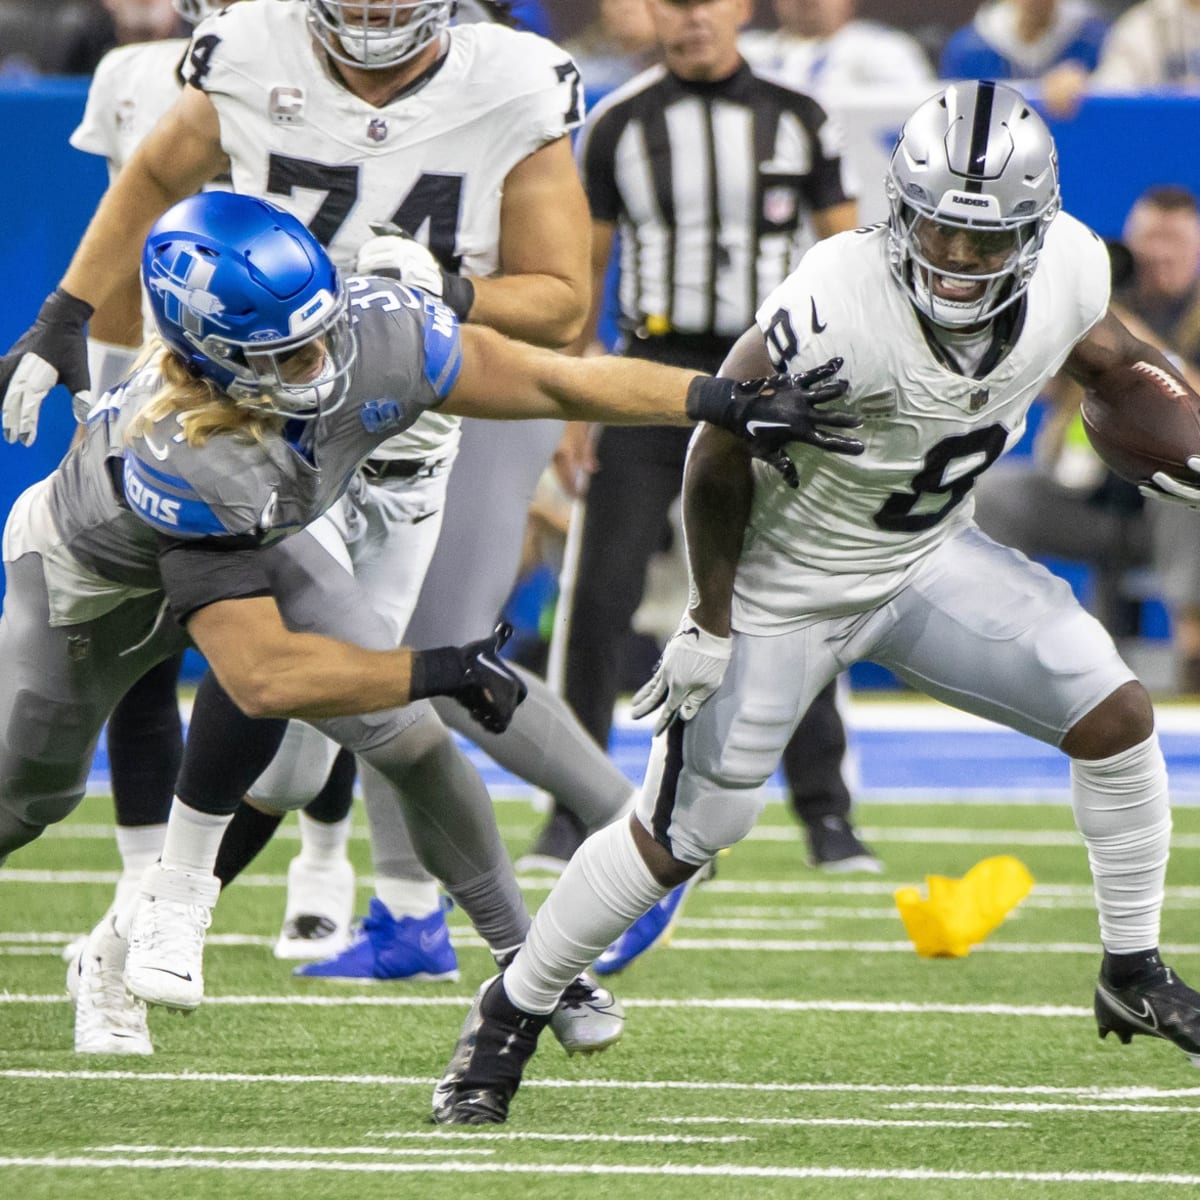 Raiders-Lions is Battle of Rookie Tight Ends